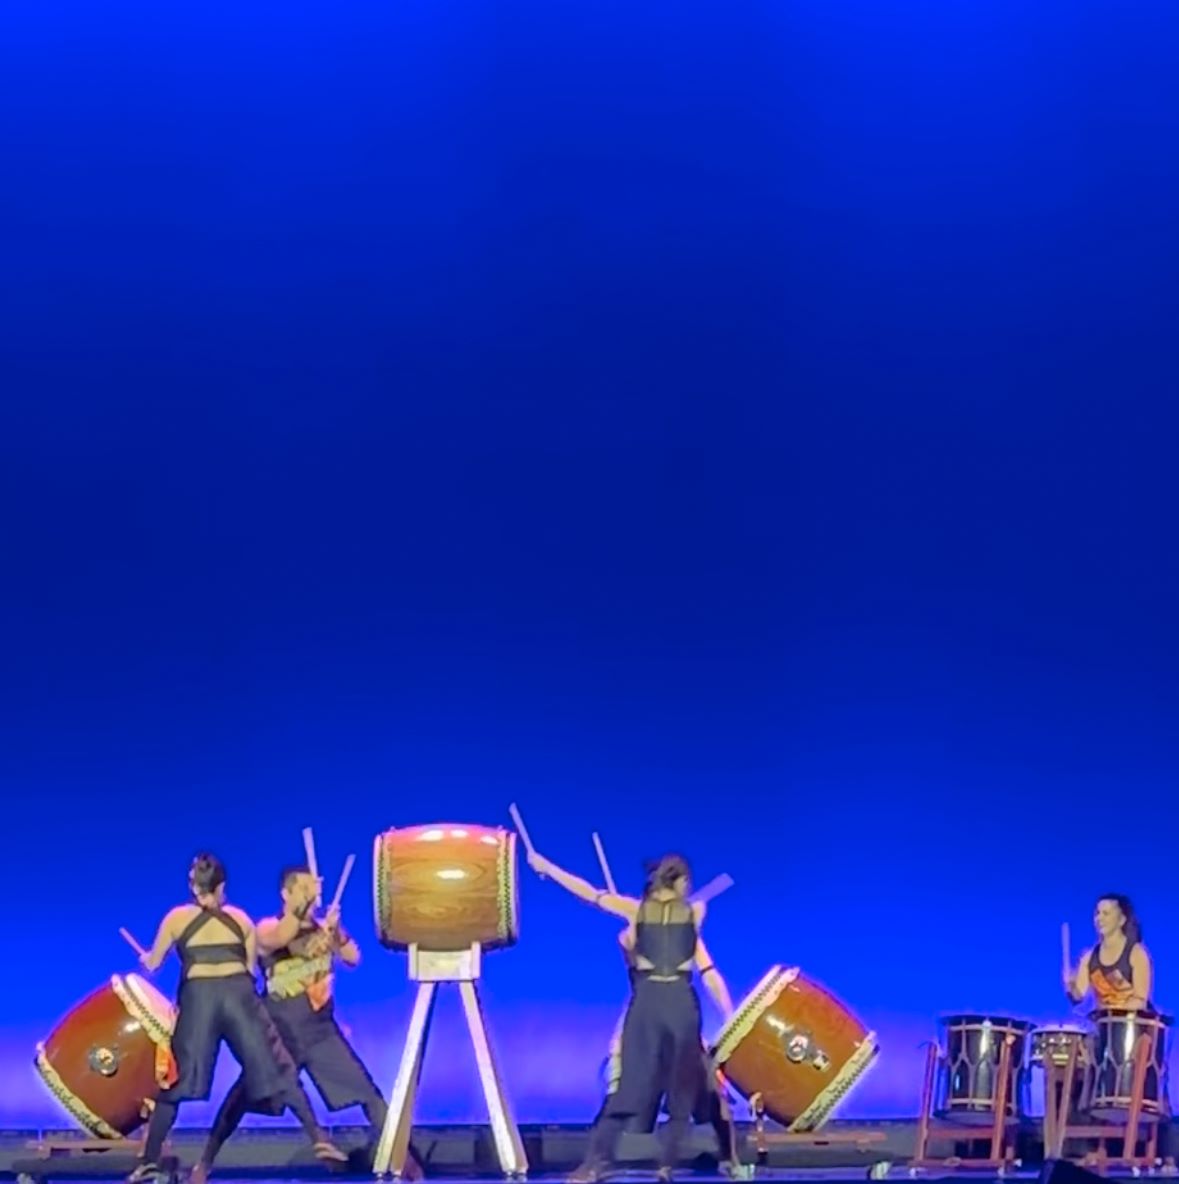 An image of the Taiko Project at El Capitan Theatre.